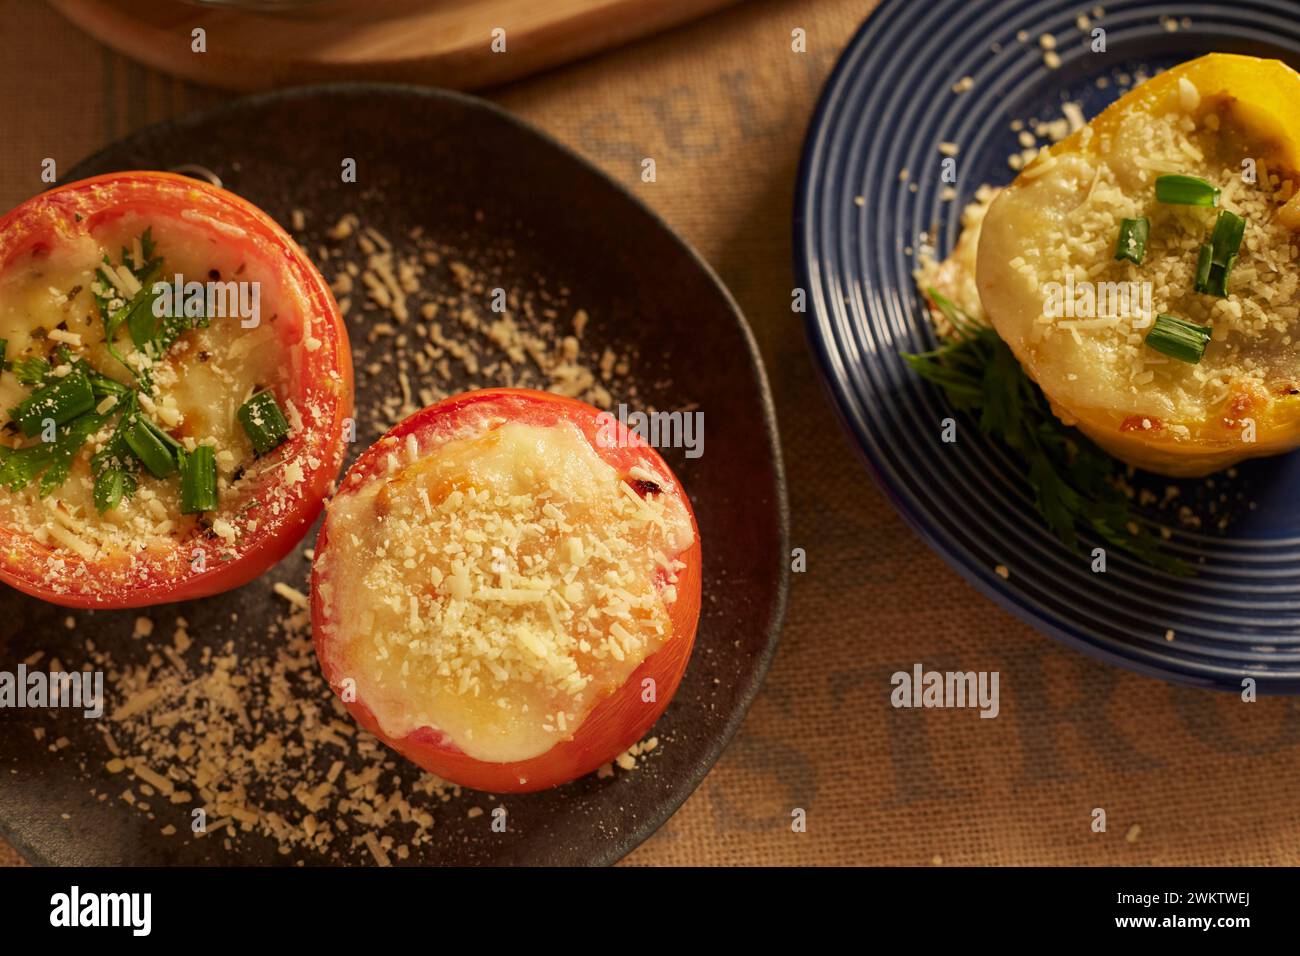 Two plates with stuffed tomatoes and grated rice Stock Photo